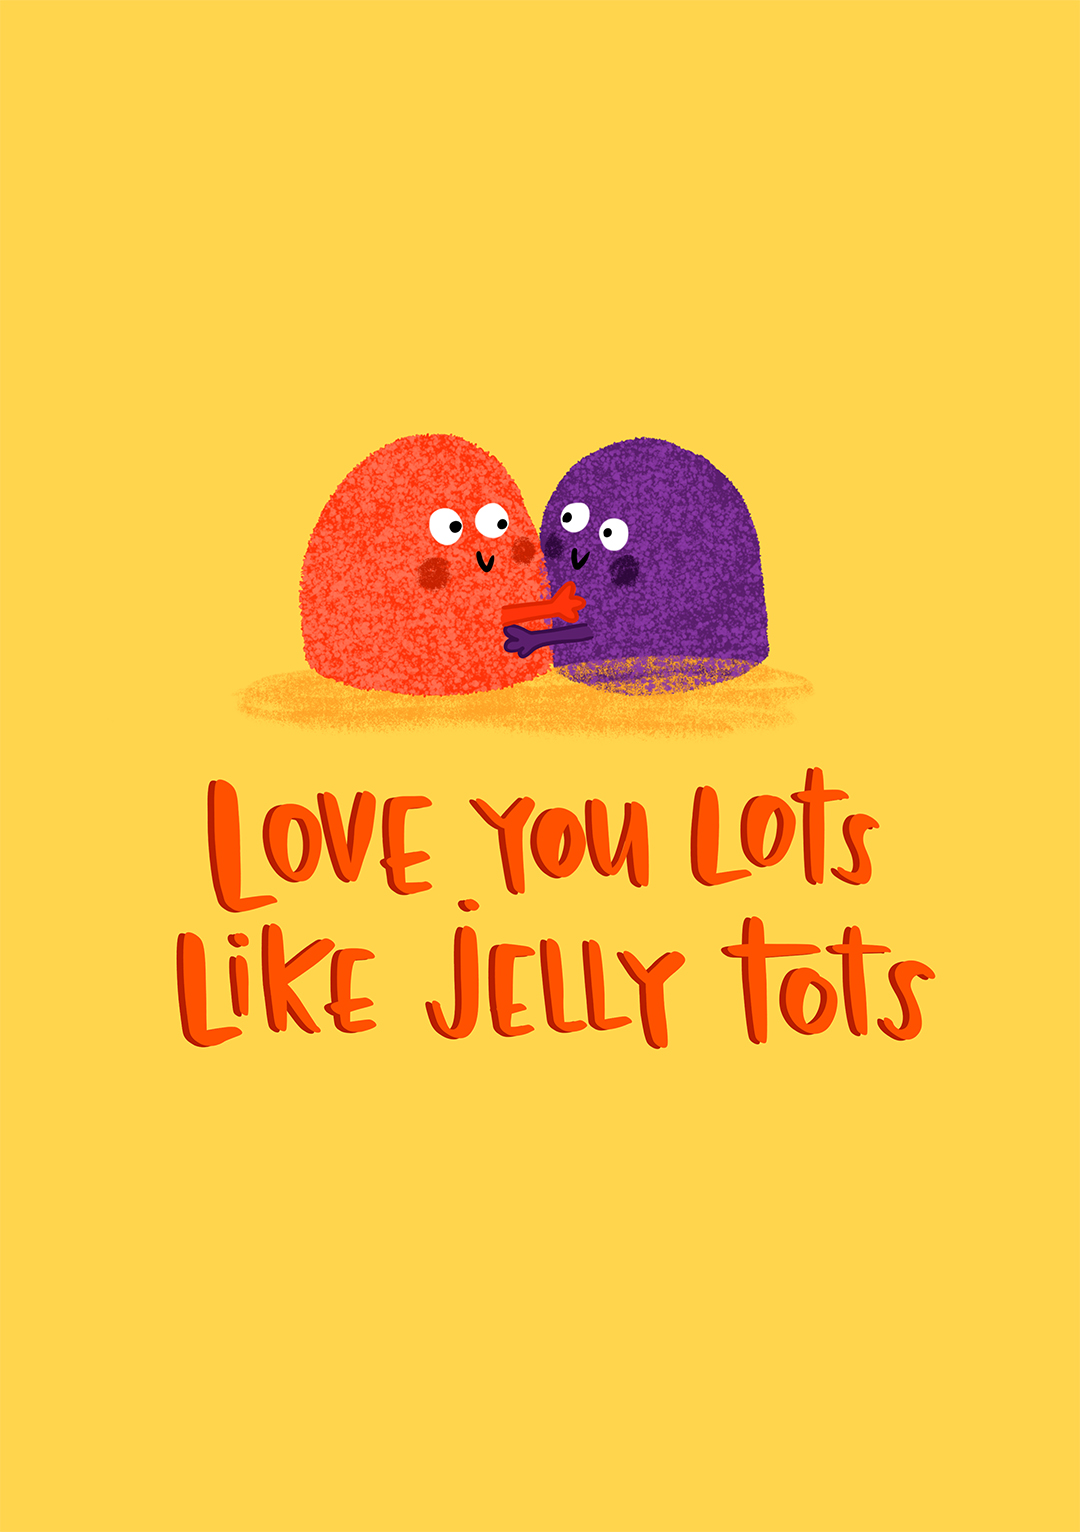 Love You Lots Like Jelly Tots - Valentine's Day Card